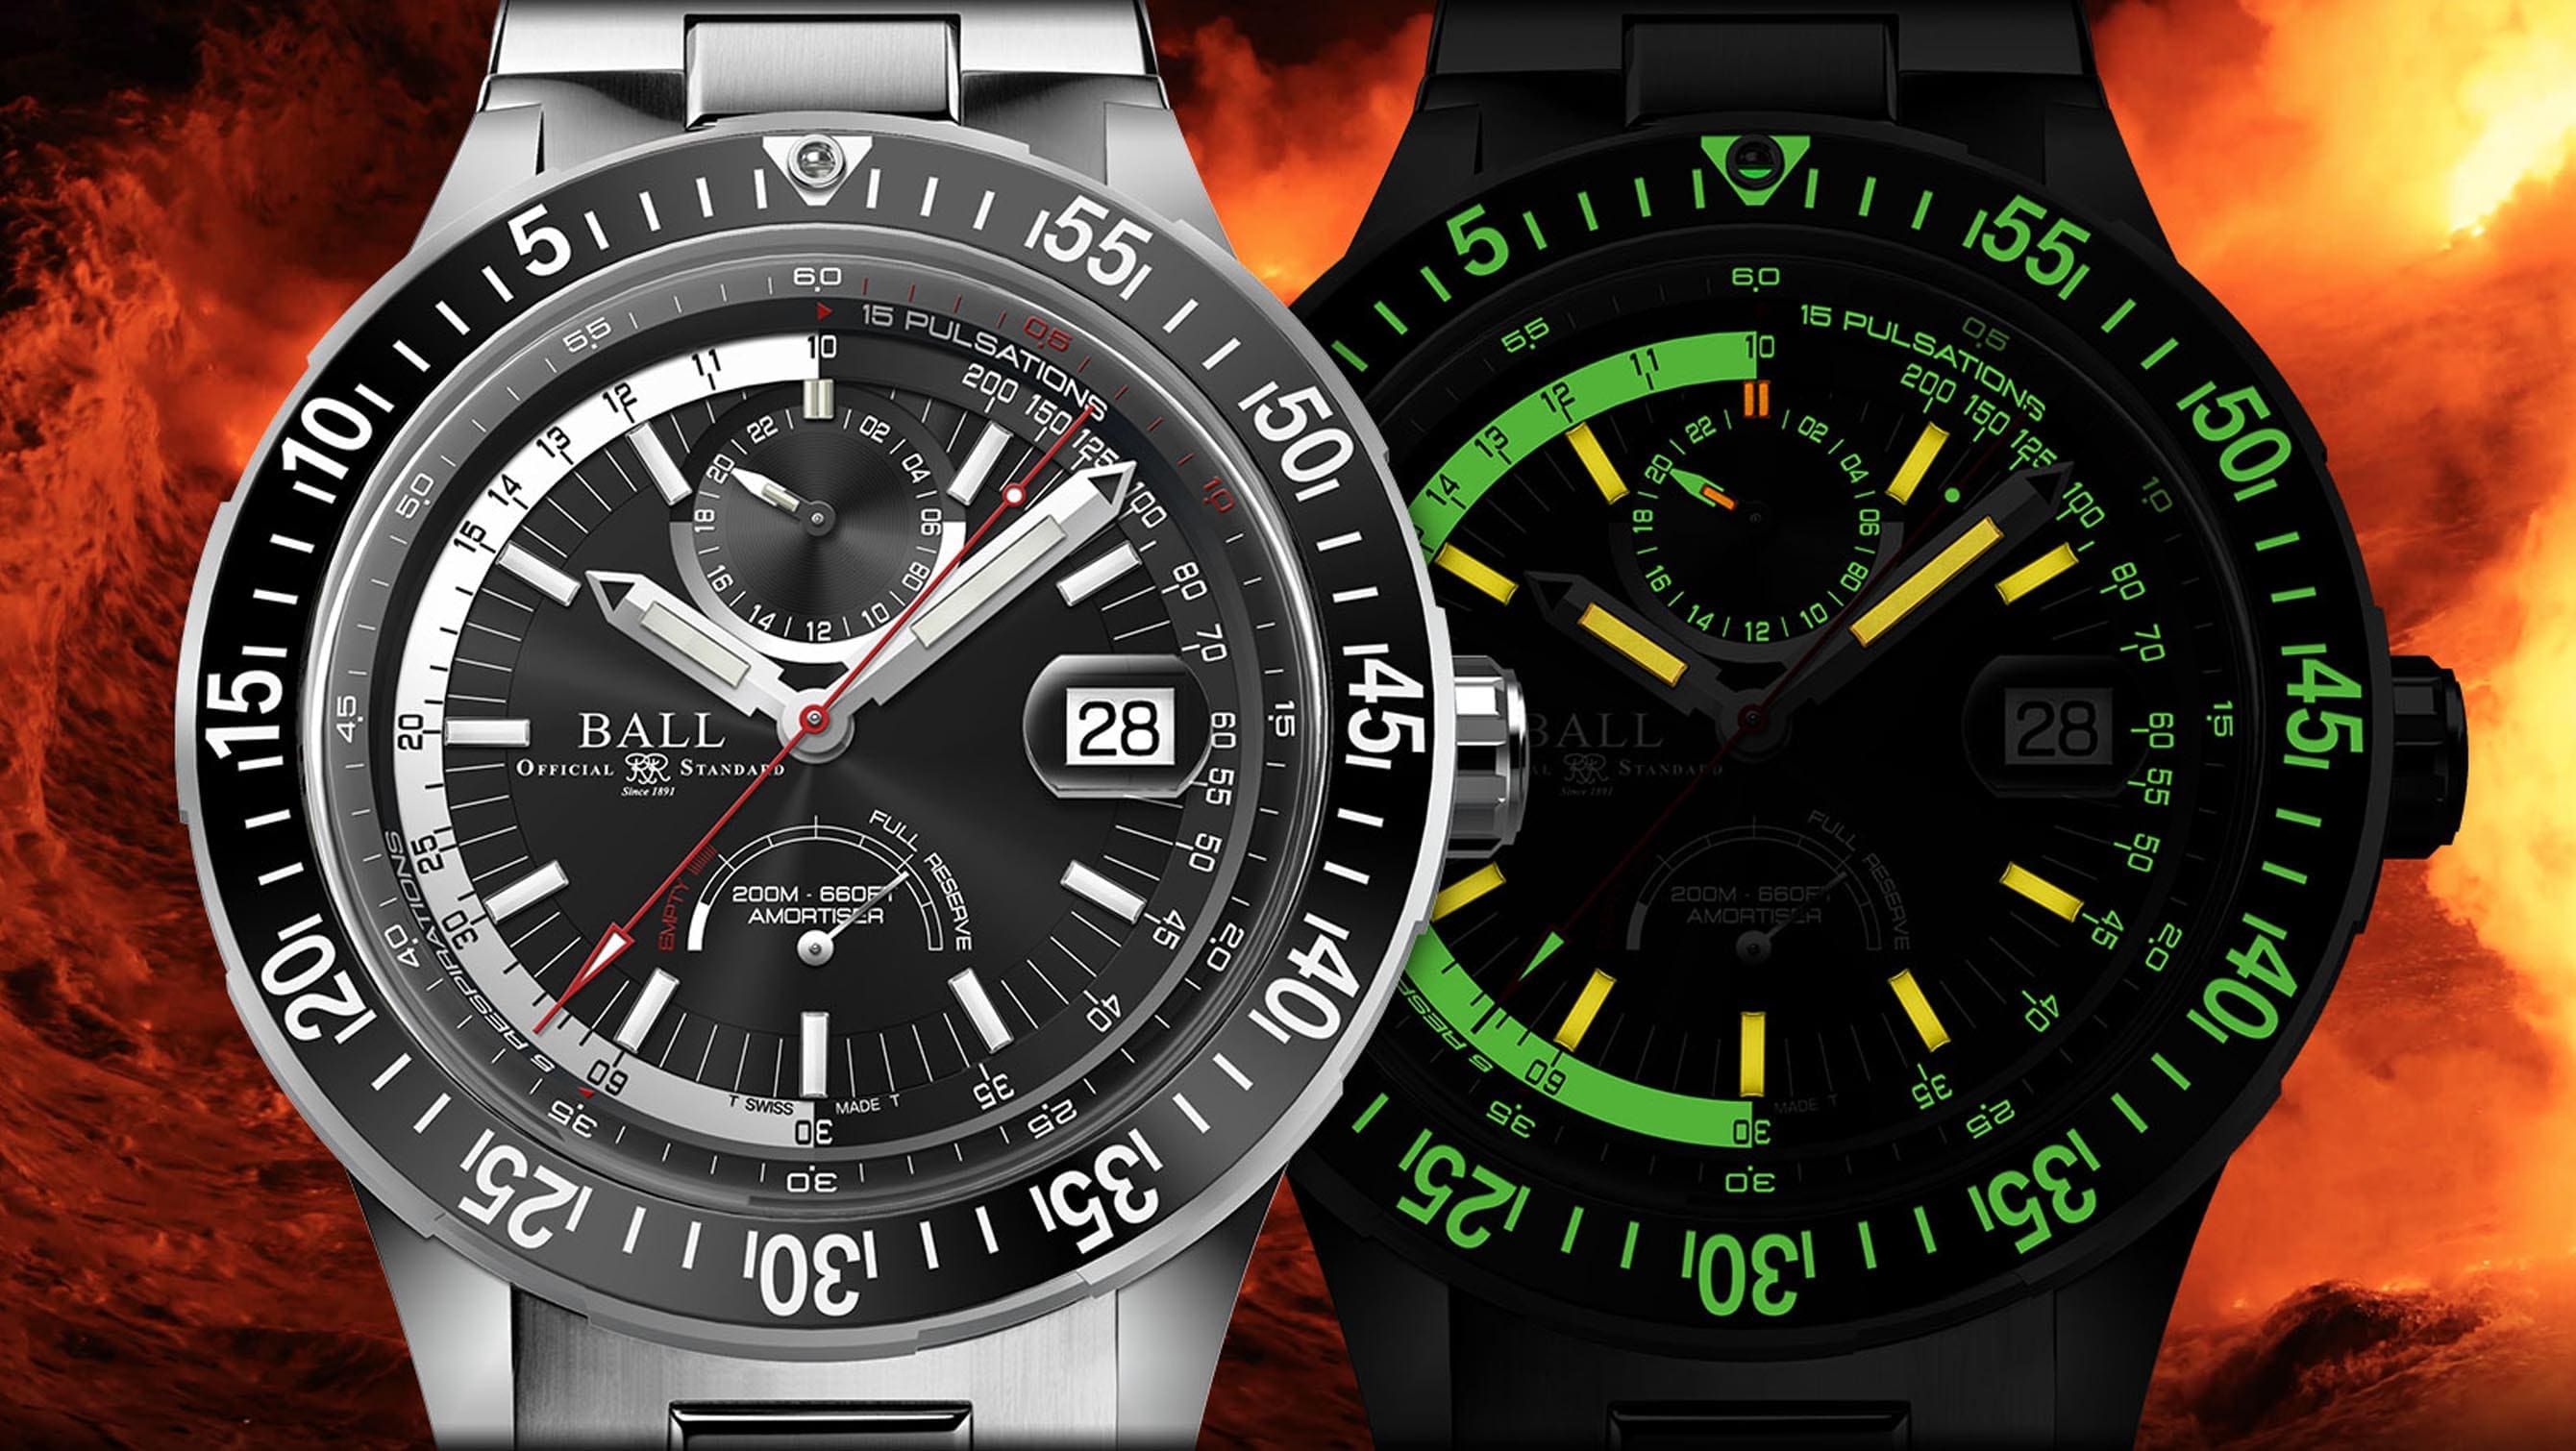 The Ball Roadmaster First Responder shows that mechanical watches can even save lives